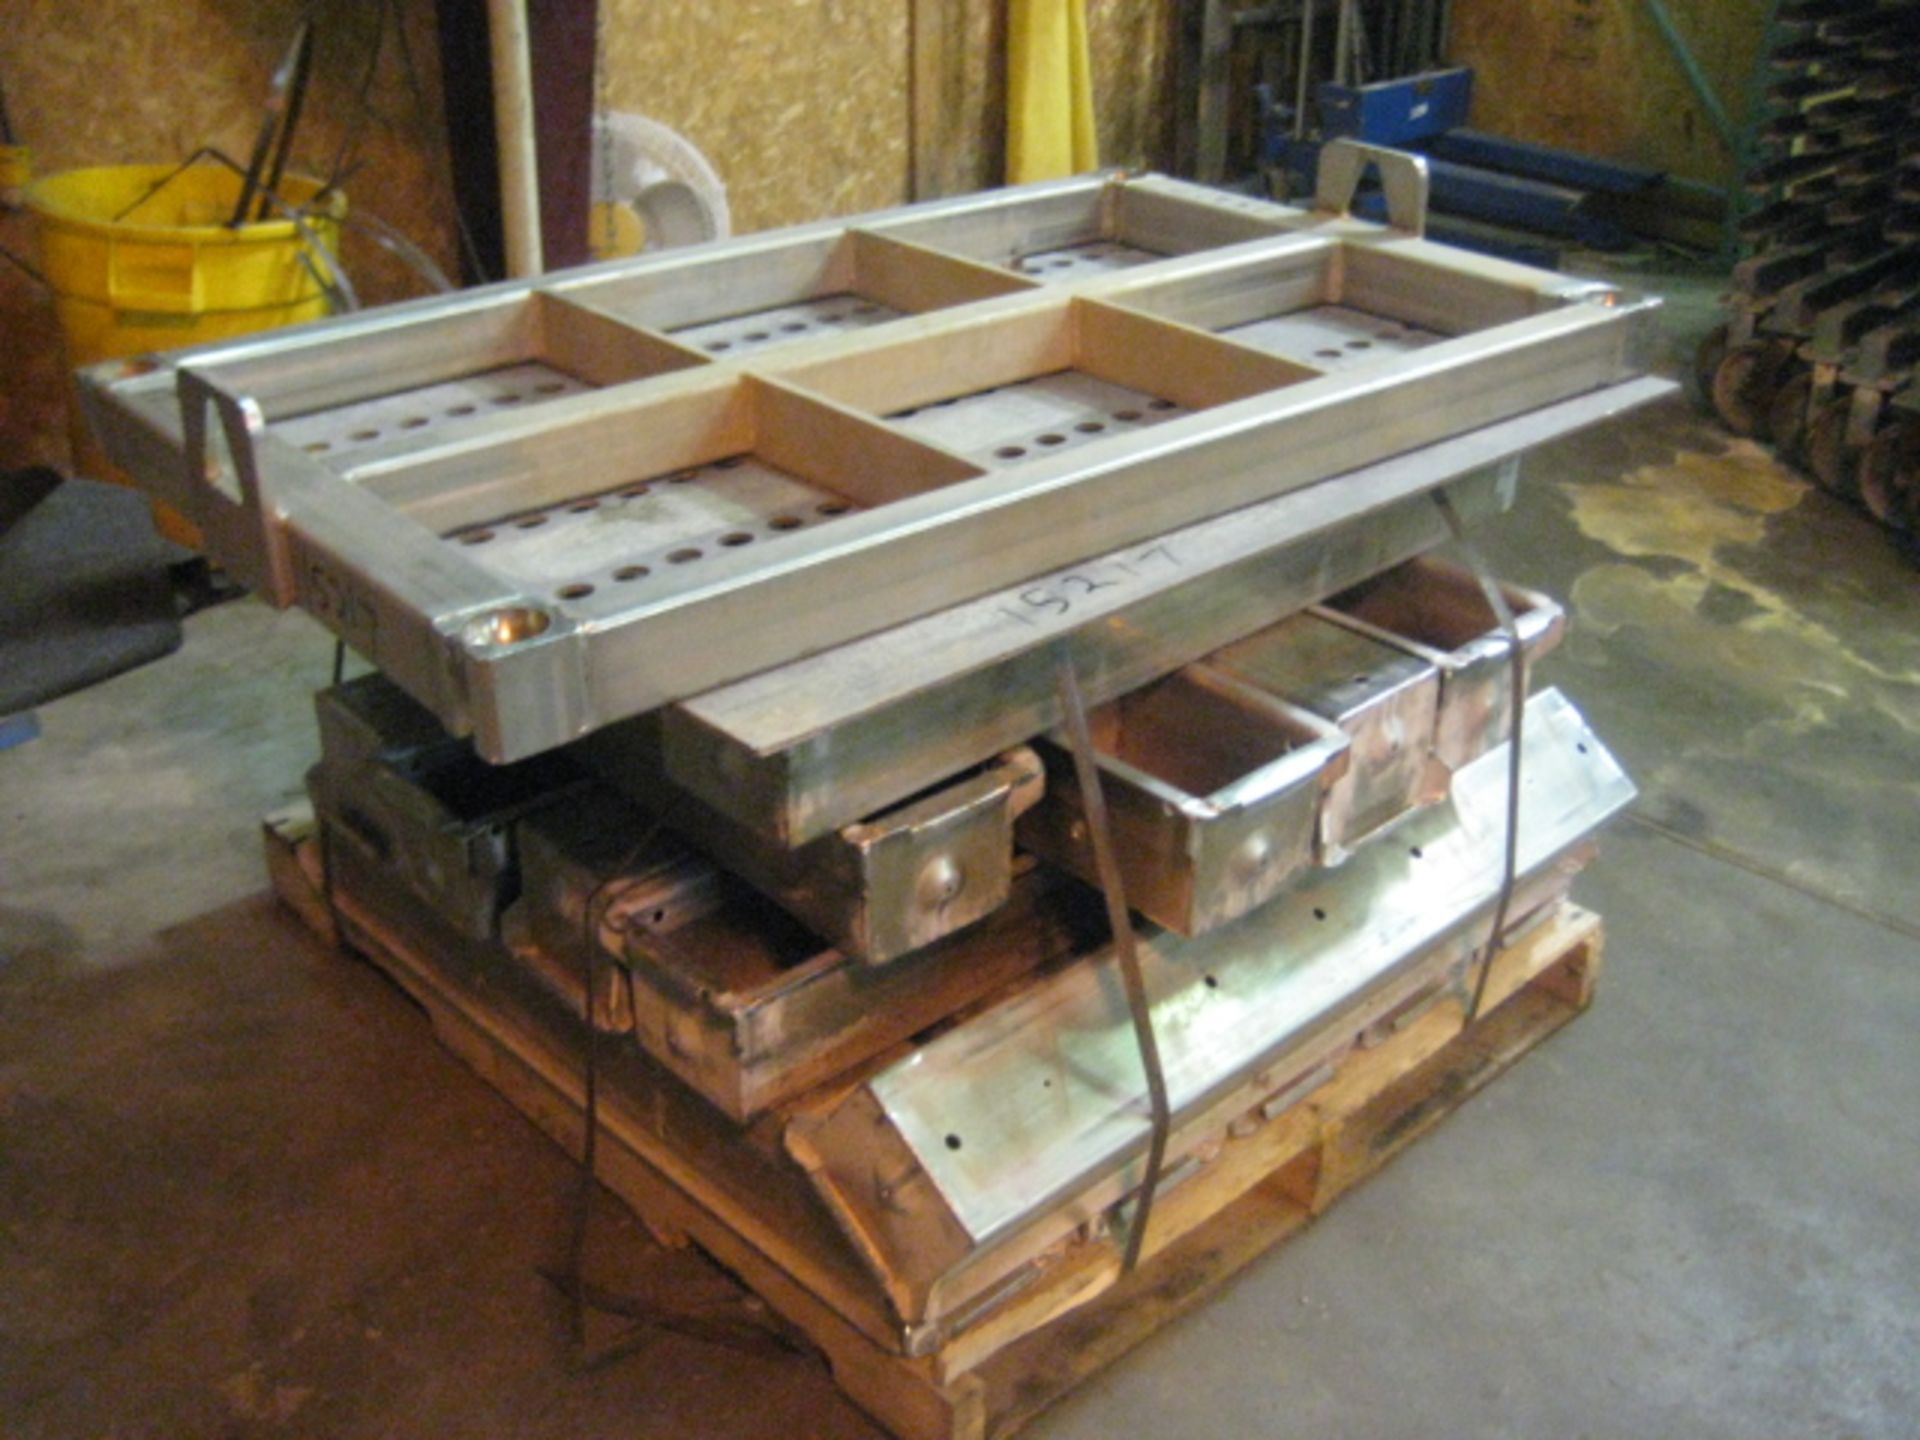 Qty (17) 6"W x  5.5"dp x 39"L ham molds/trays; has 1 top and divider plate for ham tower.